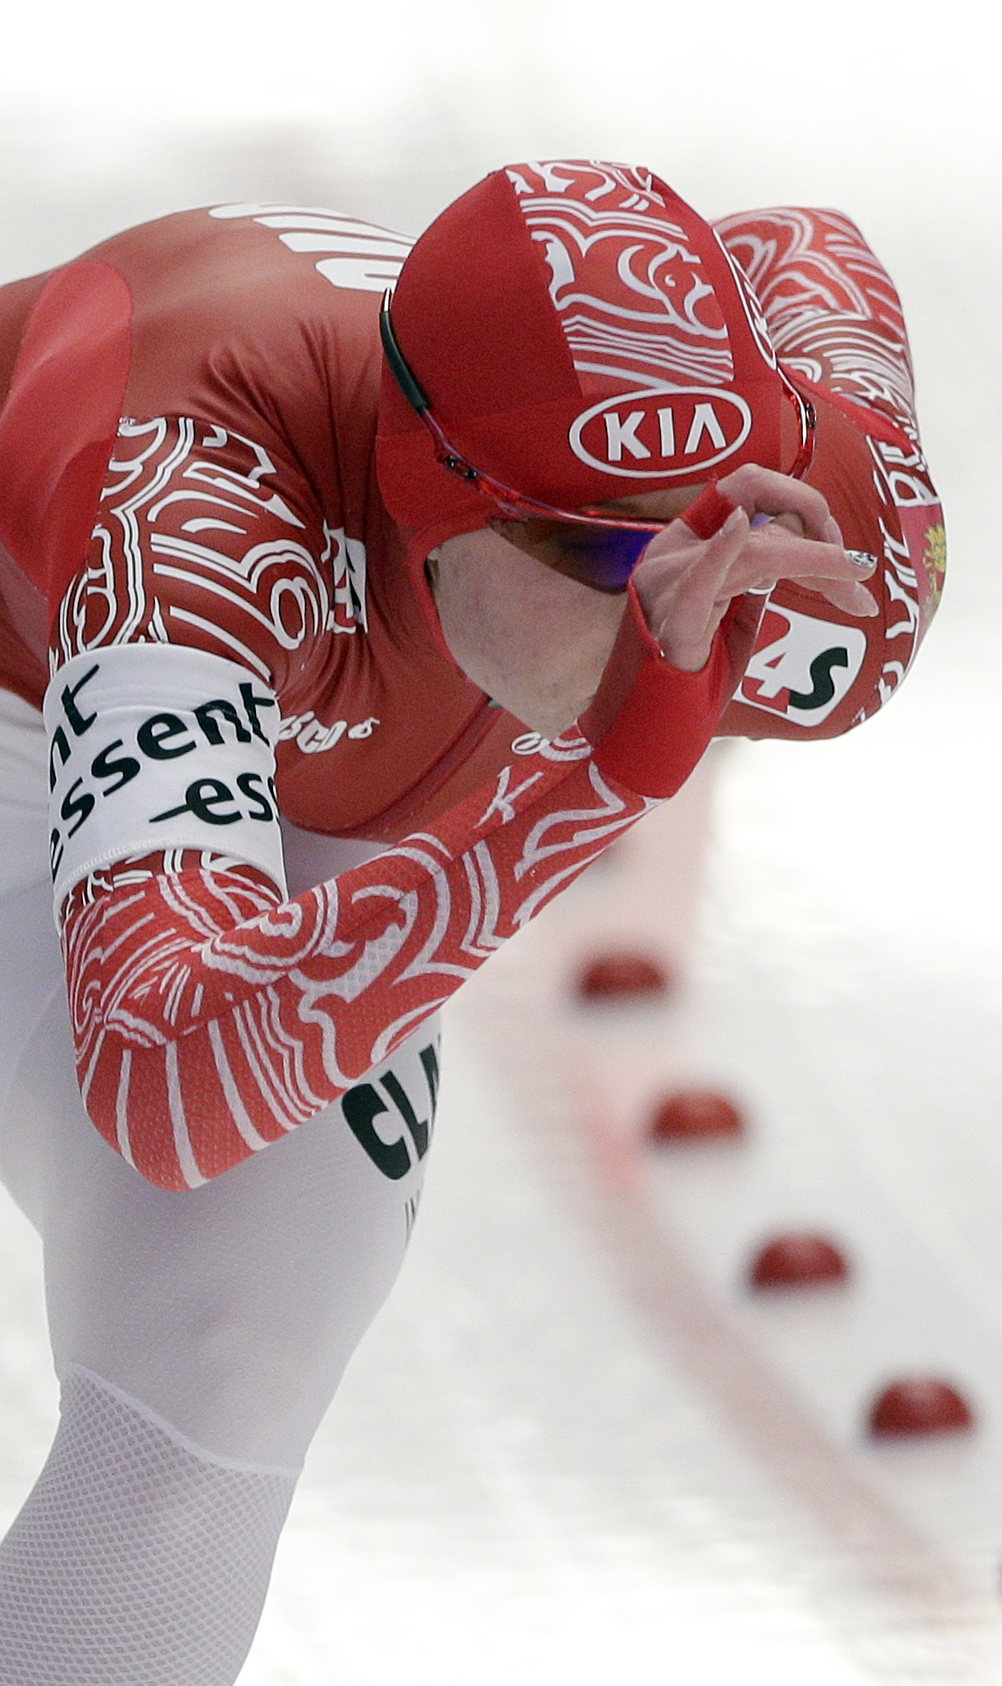 Olga Fatkulina of Russia competes during the women's 1,000m фото (photo)